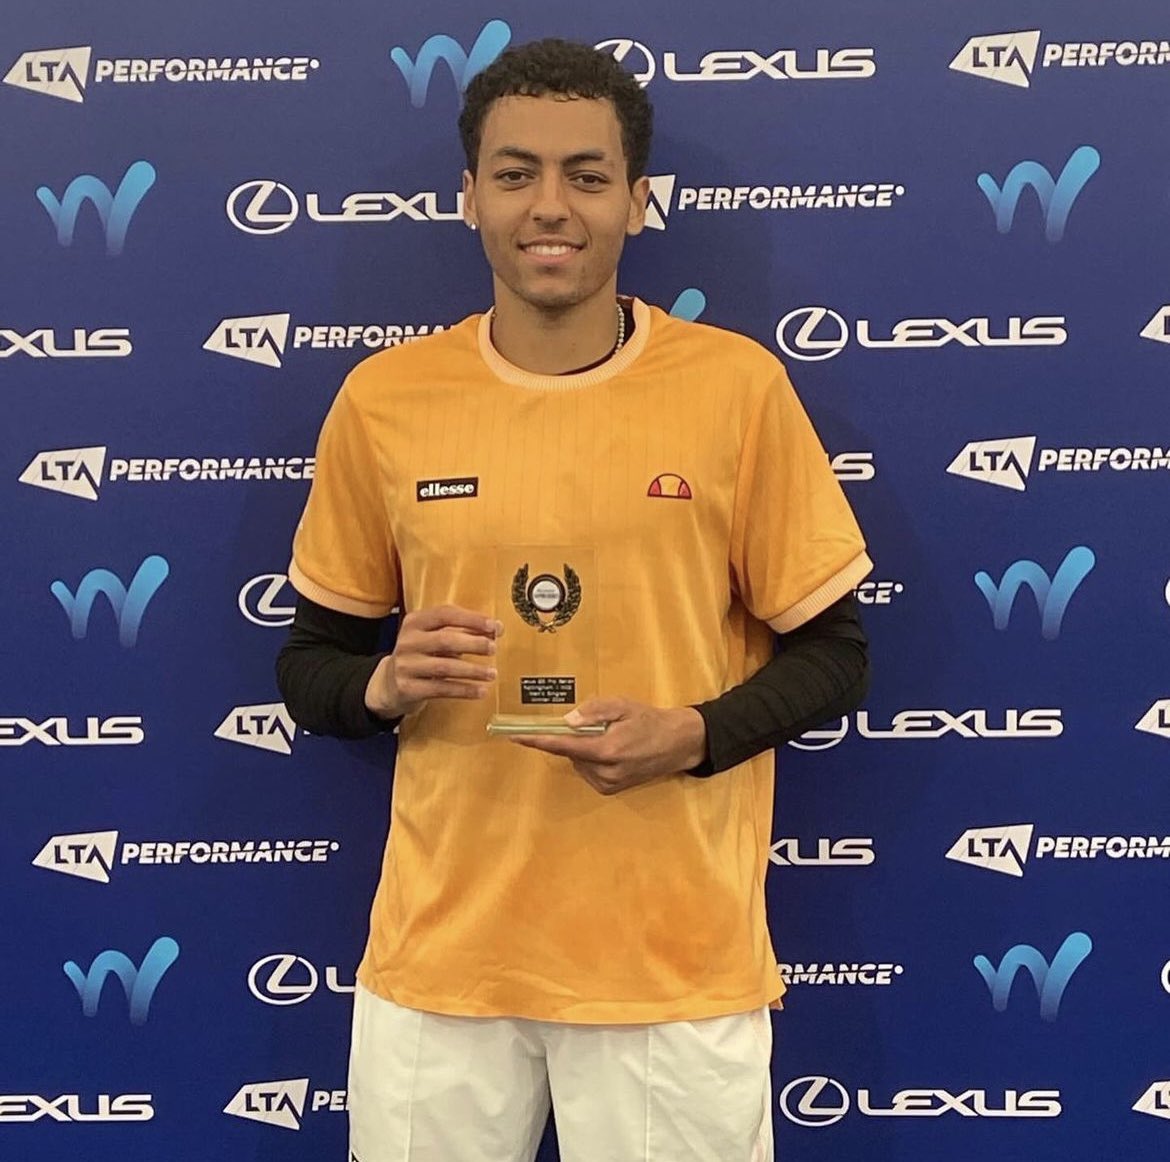 Congrats to @PaulJubb3 on the latest title at this week’s ITF Nottingham! The #GamecockGRIT was on display as he came back from down a set to claim the win 🐓